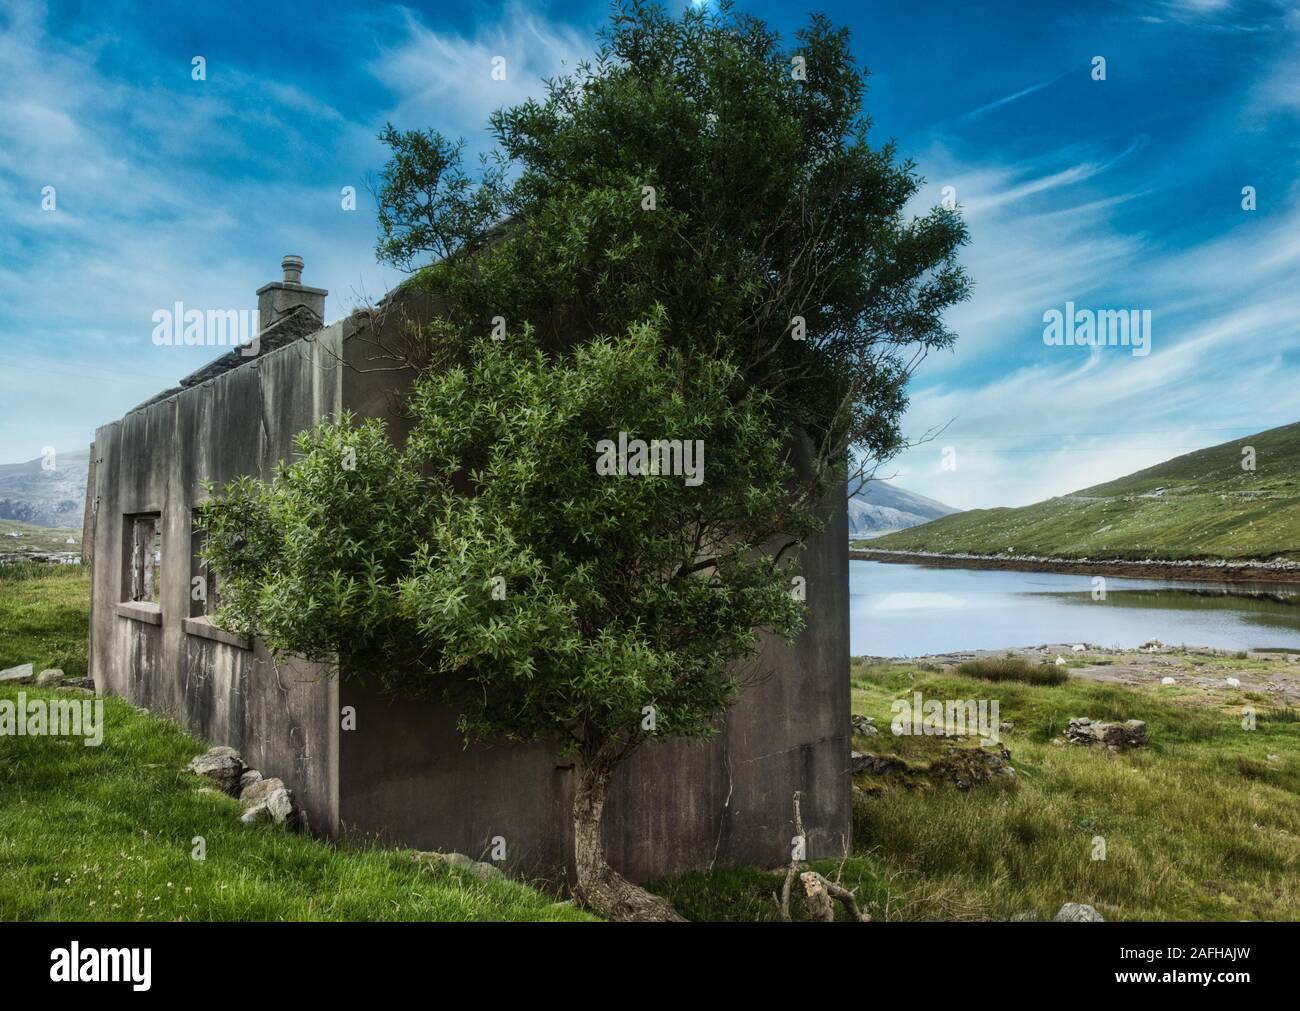 Tree growing next to abandoned crofters dwelling, Isle of Harris, Outer Hebrides, Scotland Stock Photo